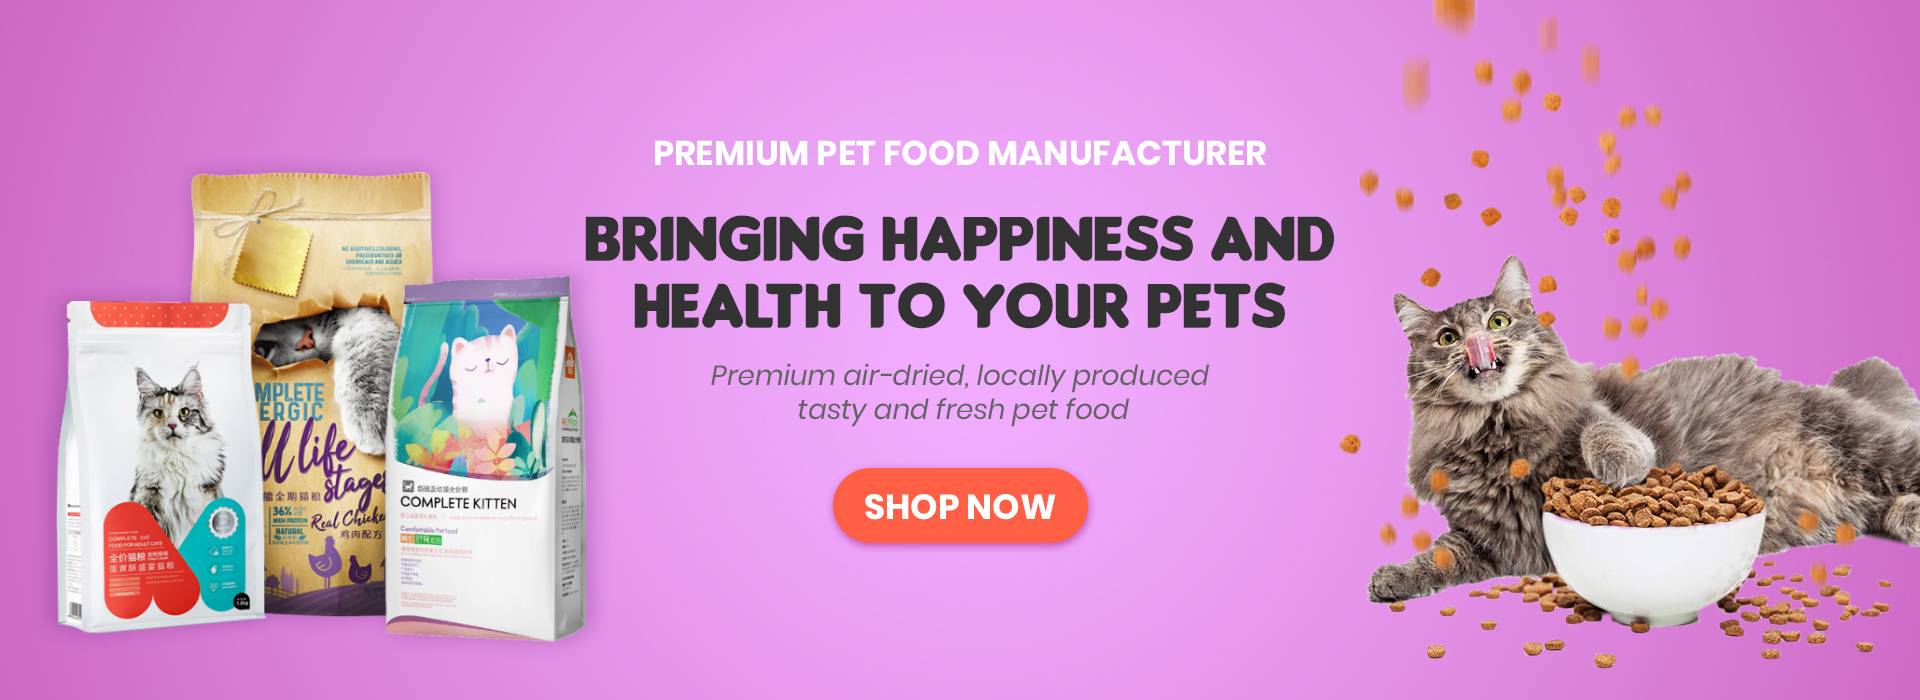 Bringing Happiness and Health to Your Pets